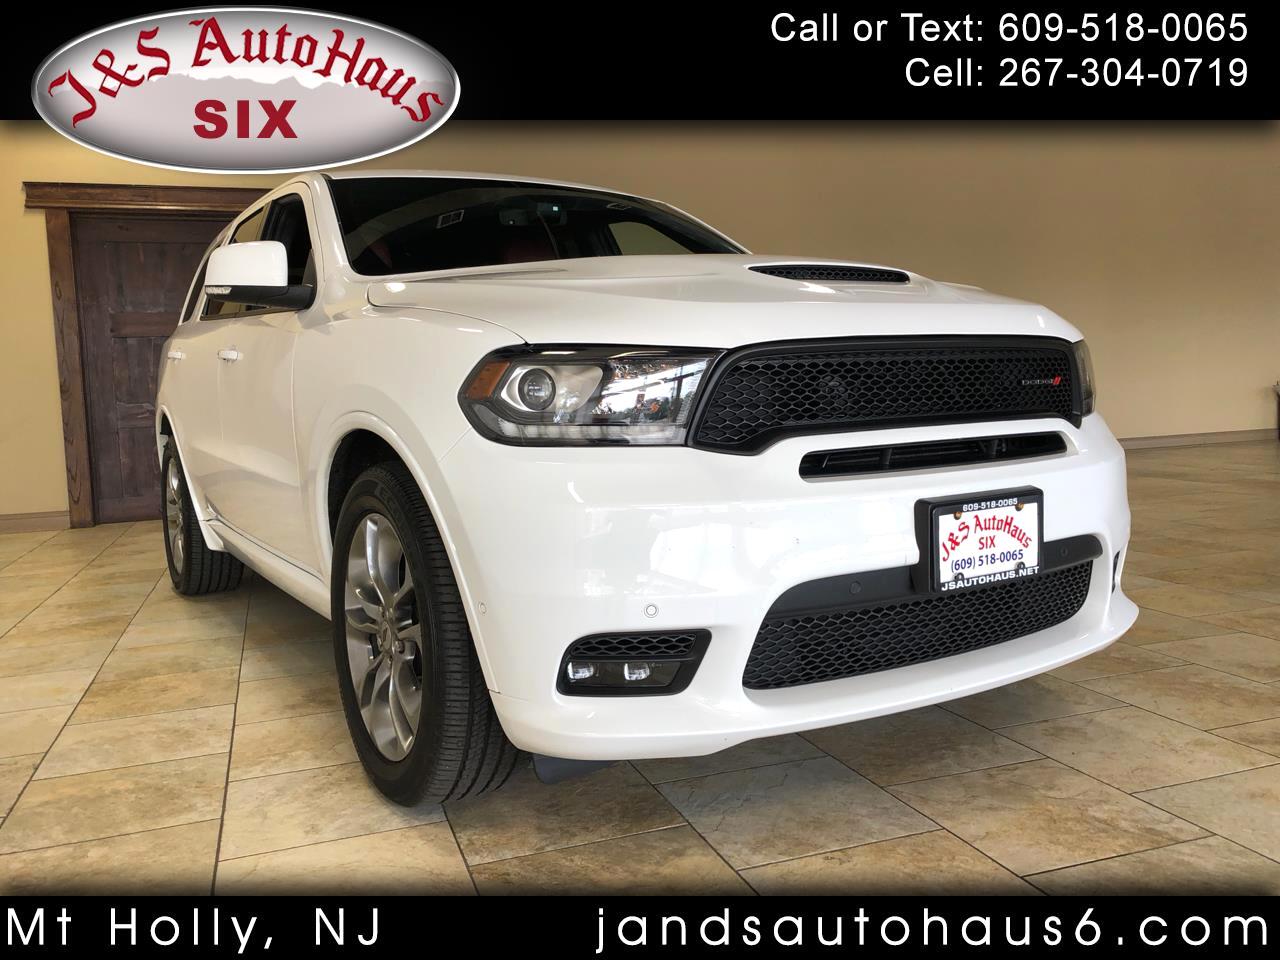 Used 2019 Dodge Durango R T Awd For Sale In Mt Holly Nj